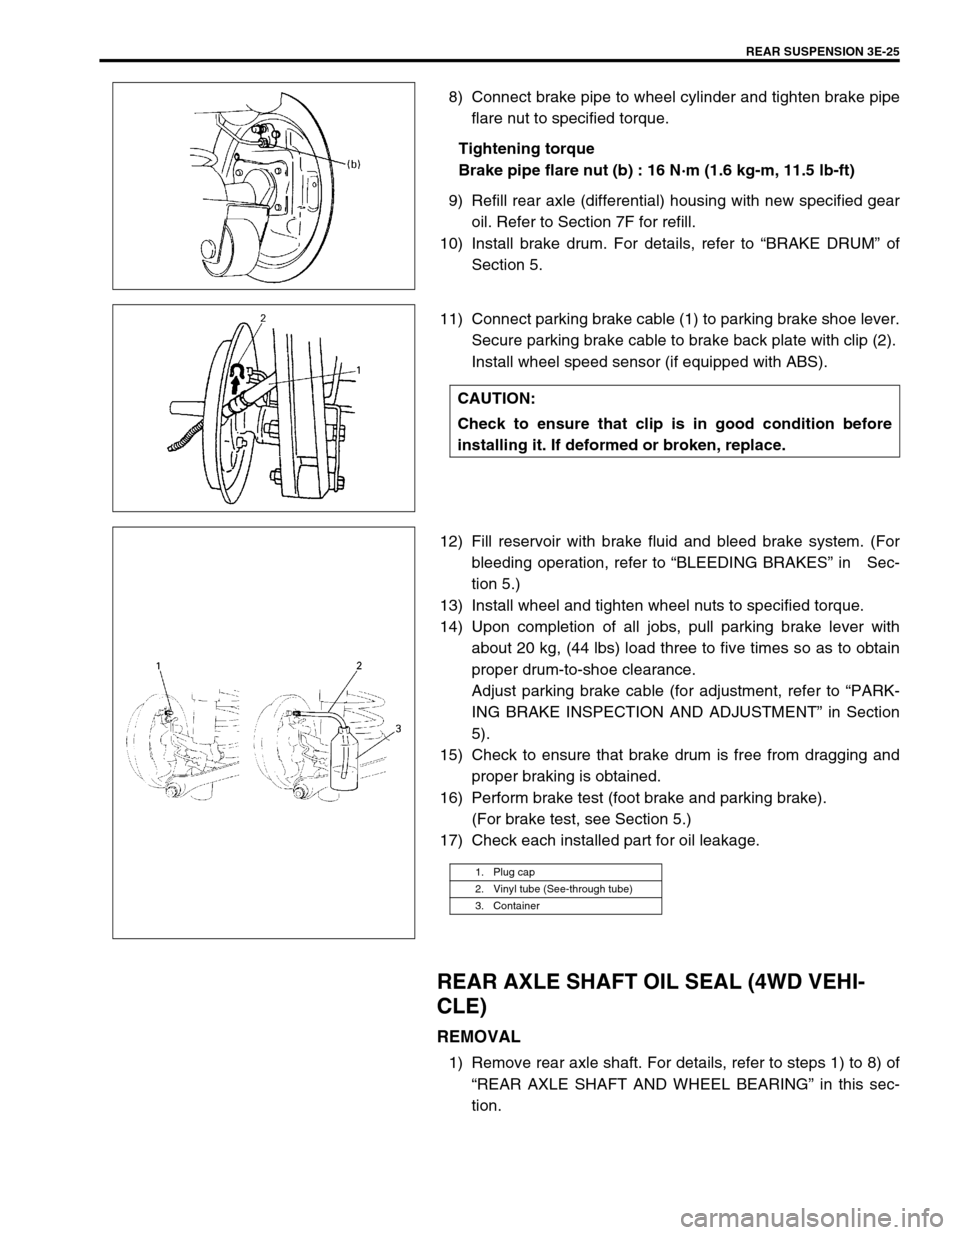 SUZUKI SWIFT 2000 1.G RG413 Service User Guide REAR SUSPENSION 3E-25
8) Connect brake pipe to wheel cylinder and tighten brake pipe
flare nut to specified torque.
Tightening torque
Brake pipe flare nut (b) : 16 N·m (1.6 kg-m, 11.5 lb-ft)
9) Refil